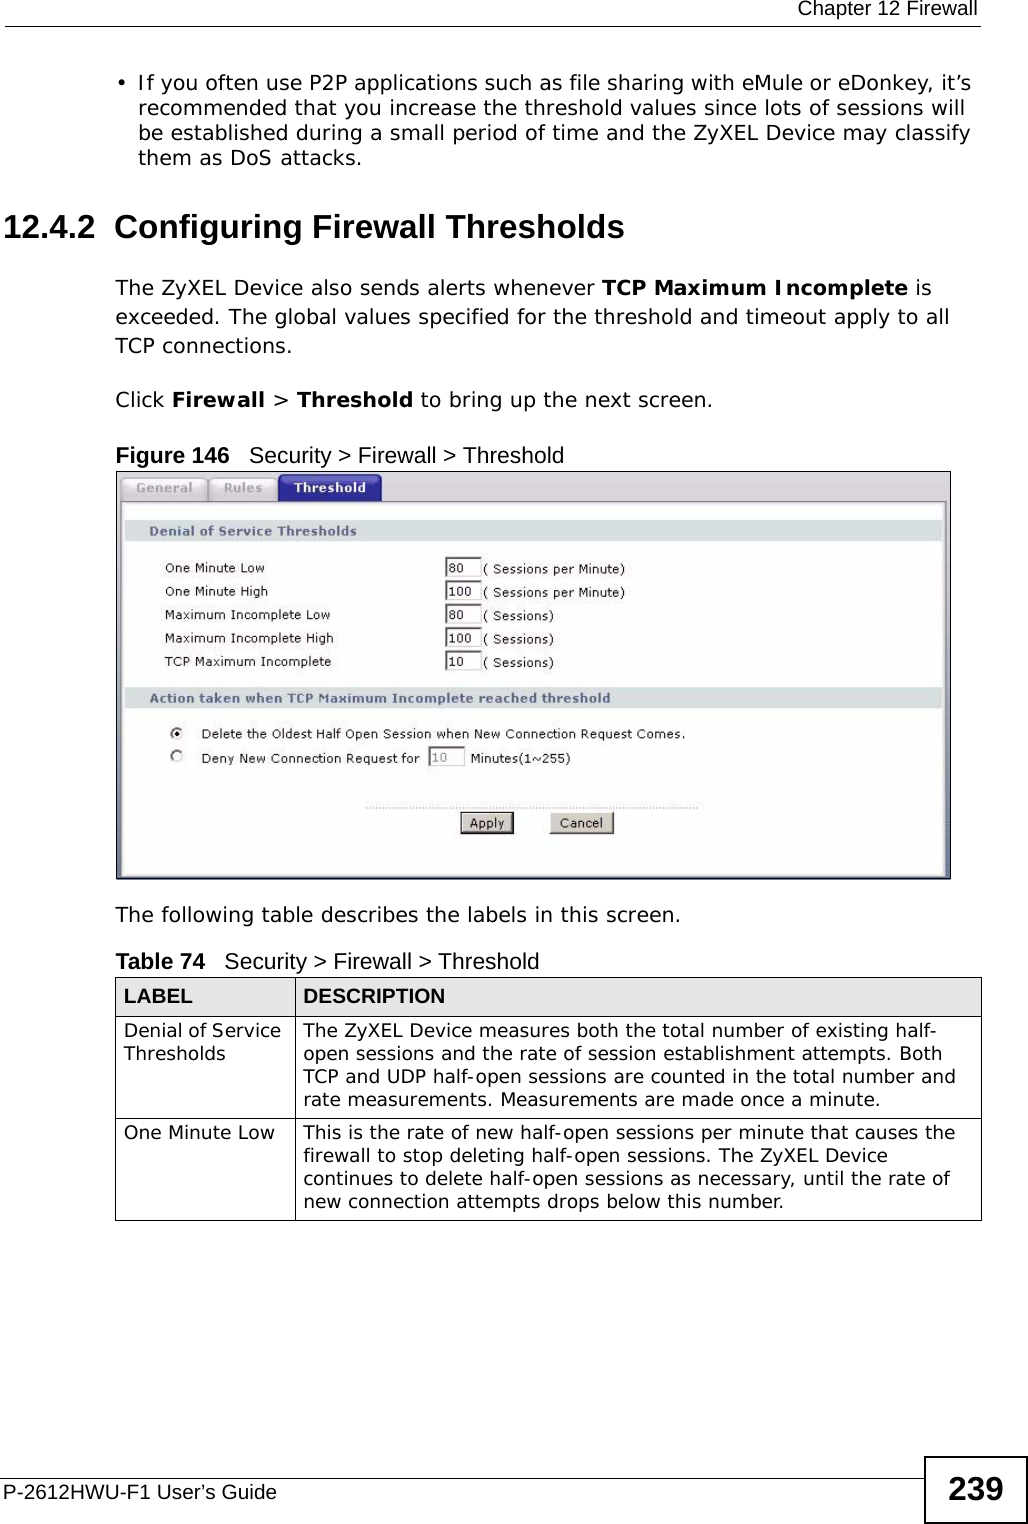  Chapter 12 FirewallP-2612HWU-F1 User’s Guide 239• If you often use P2P applications such as file sharing with eMule or eDonkey, it’s recommended that you increase the threshold values since lots of sessions will be established during a small period of time and the ZyXEL Device may classify them as DoS attacks. 12.4.2  Configuring Firewall ThresholdsThe ZyXEL Device also sends alerts whenever TCP Maximum Incomplete is exceeded. The global values specified for the threshold and timeout apply to all TCP connections. Click Firewall &gt; Threshold to bring up the next screen.Figure 146   Security &gt; Firewall &gt; ThresholdThe following table describes the labels in this screen. Table 74   Security &gt; Firewall &gt; ThresholdLABEL DESCRIPTIONDenial of Service Thresholds The ZyXEL Device measures both the total number of existing half-open sessions and the rate of session establishment attempts. Both TCP and UDP half-open sessions are counted in the total number and rate measurements. Measurements are made once a minute.One Minute Low This is the rate of new half-open sessions per minute that causes the firewall to stop deleting half-open sessions. The ZyXEL Device continues to delete half-open sessions as necessary, until the rate of new connection attempts drops below this number.